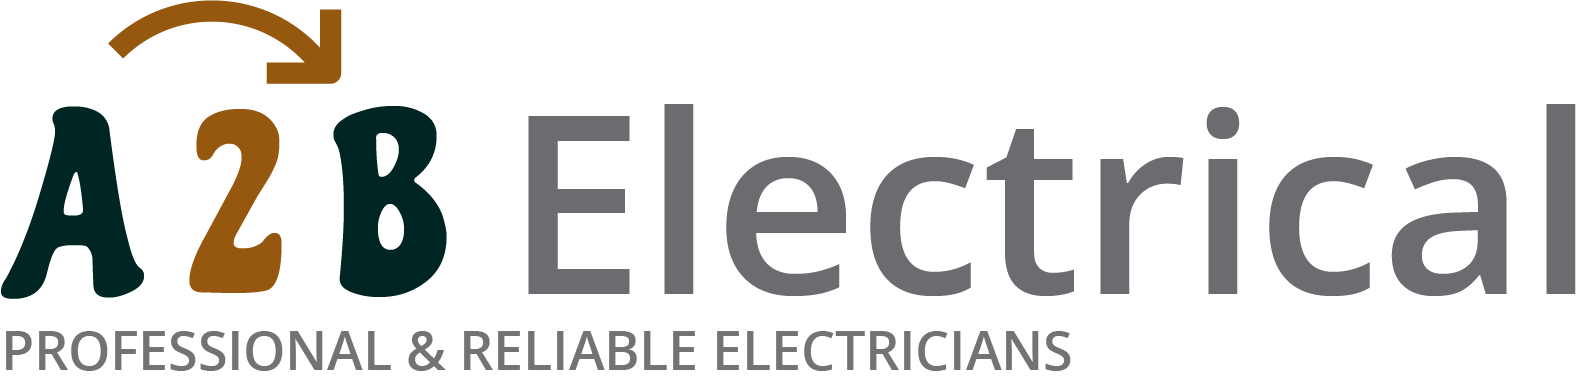 If you have electrical wiring problems in Chandlers Ford, we can provide an electrician to have a look for you. 